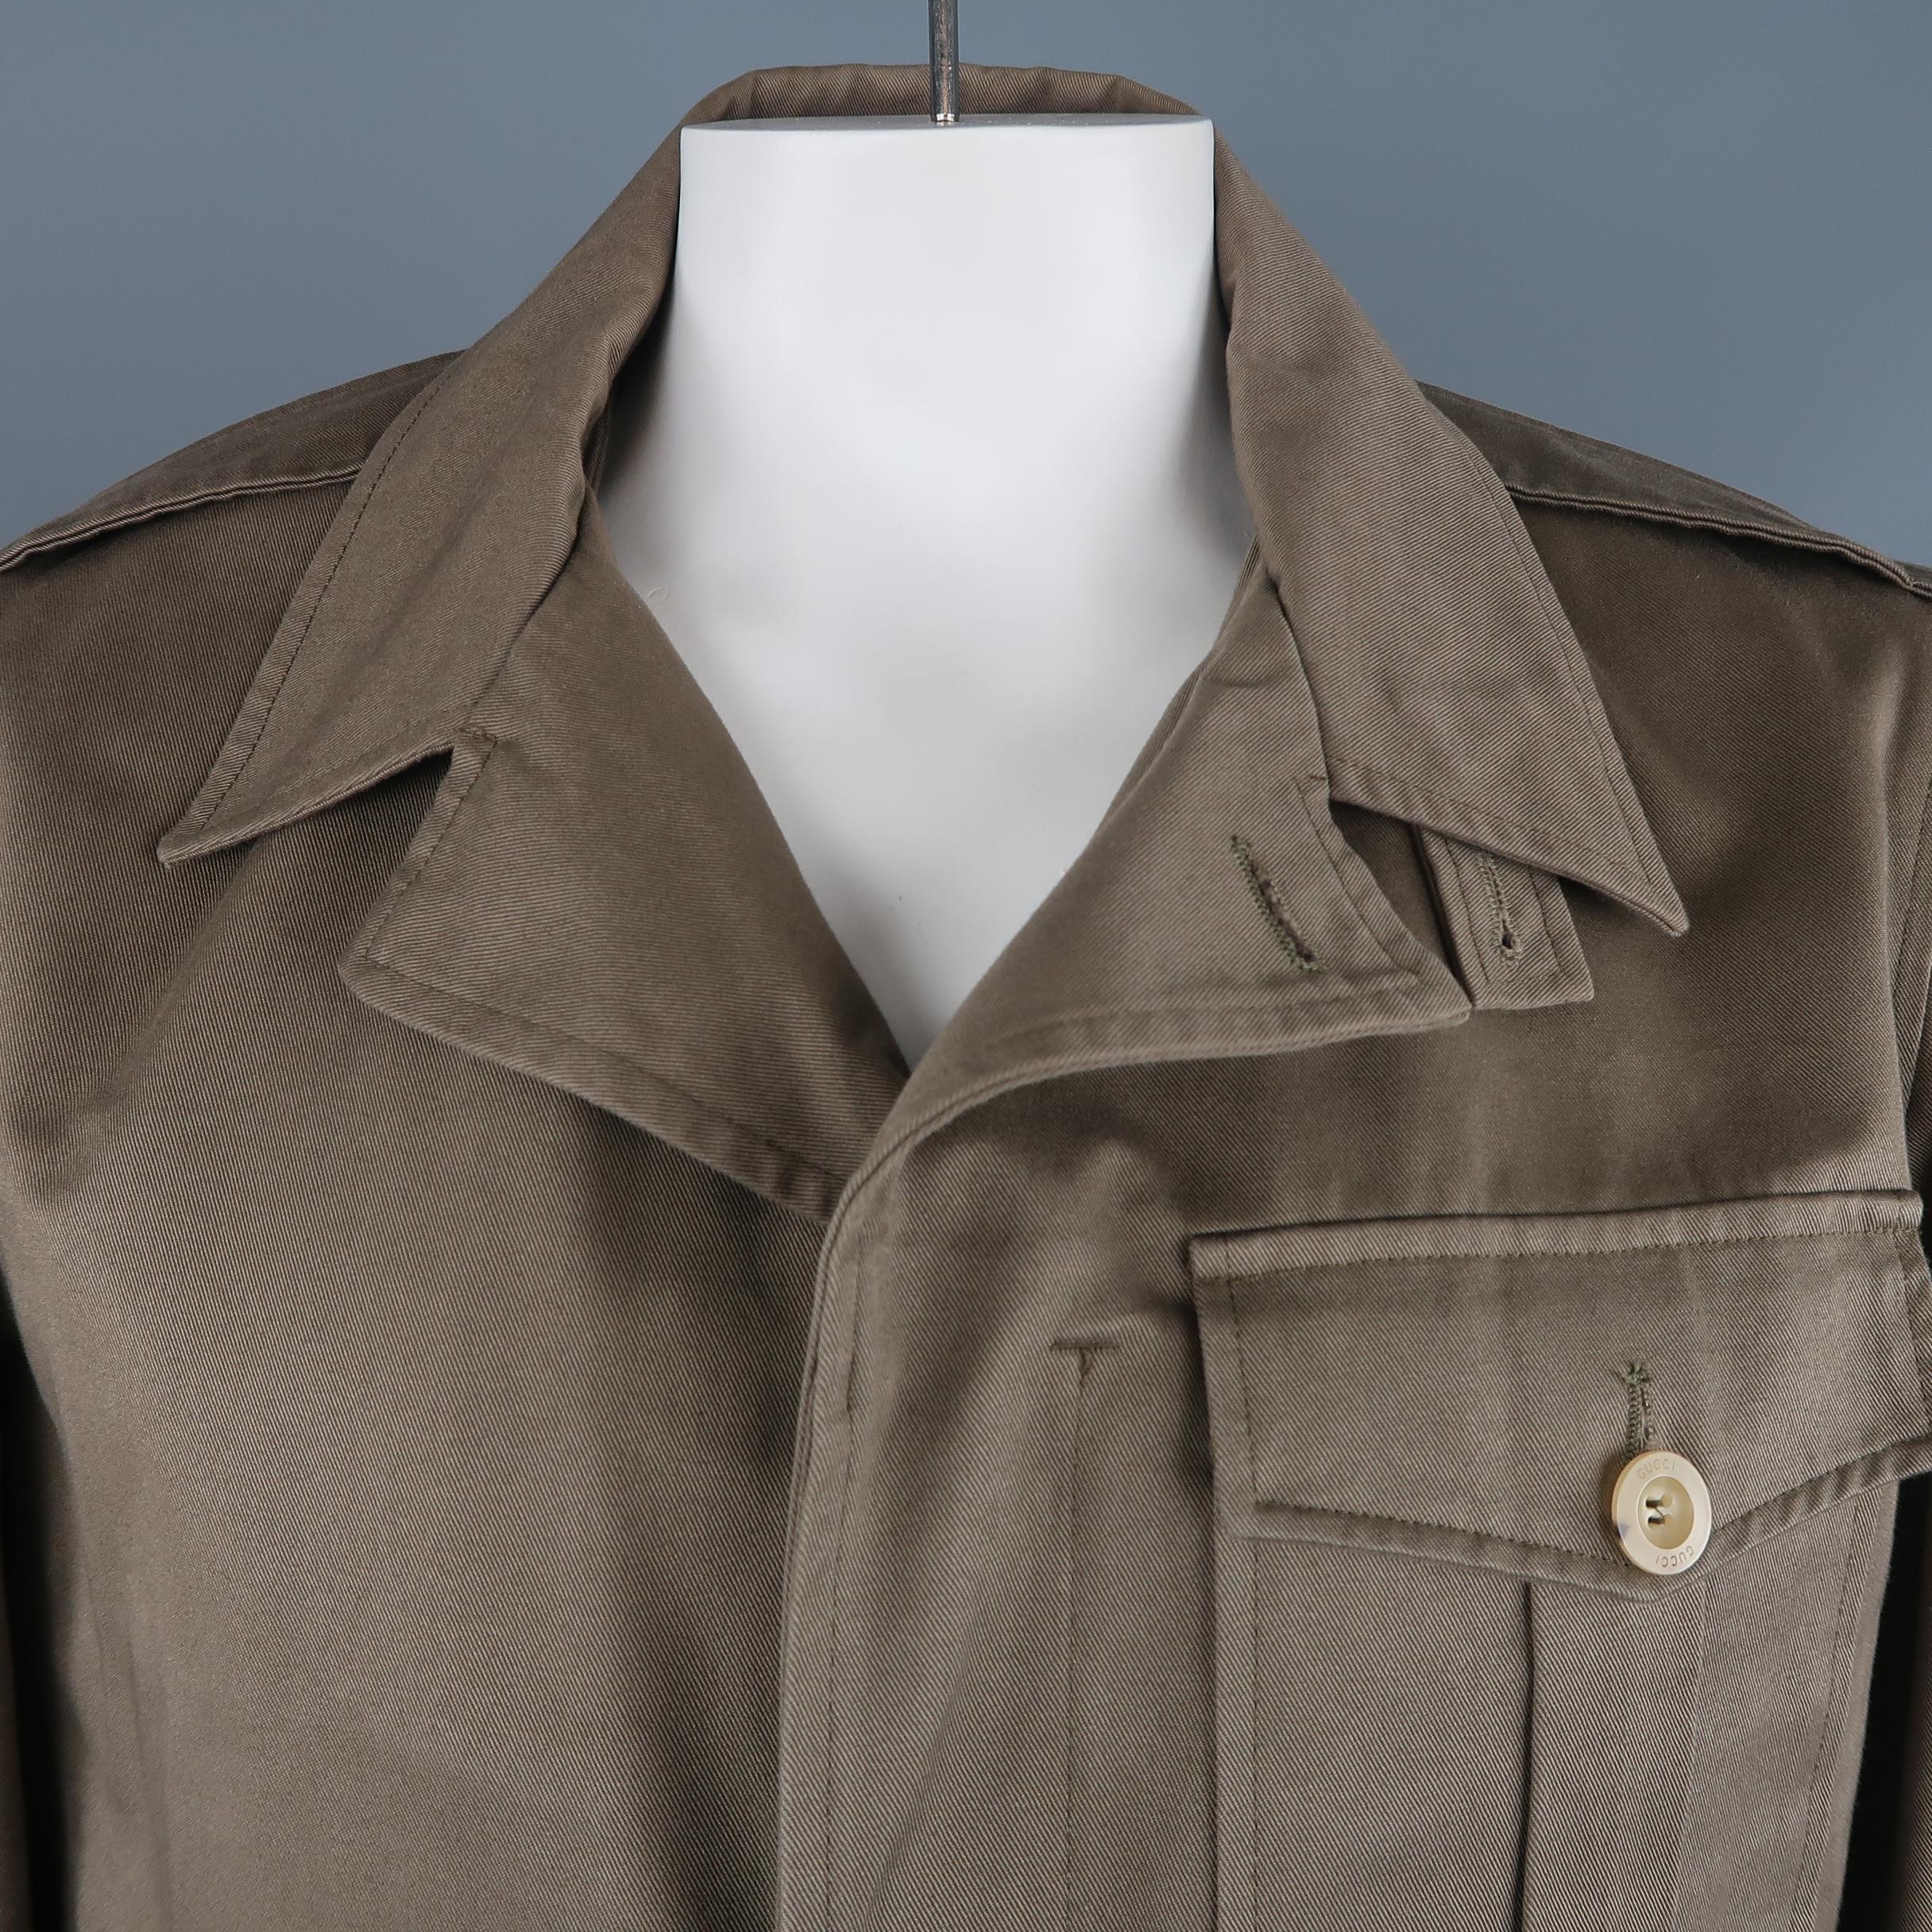 GUCCI by TOM FORD army style jacket comes in olive green cotton twill with a pointed lapel, hidden placket zip and button front, epaulets, side tabs, and patch flap pocket. Wear and marks throughout. As-is. Made in Italy.
 
Fair Pre-Owned